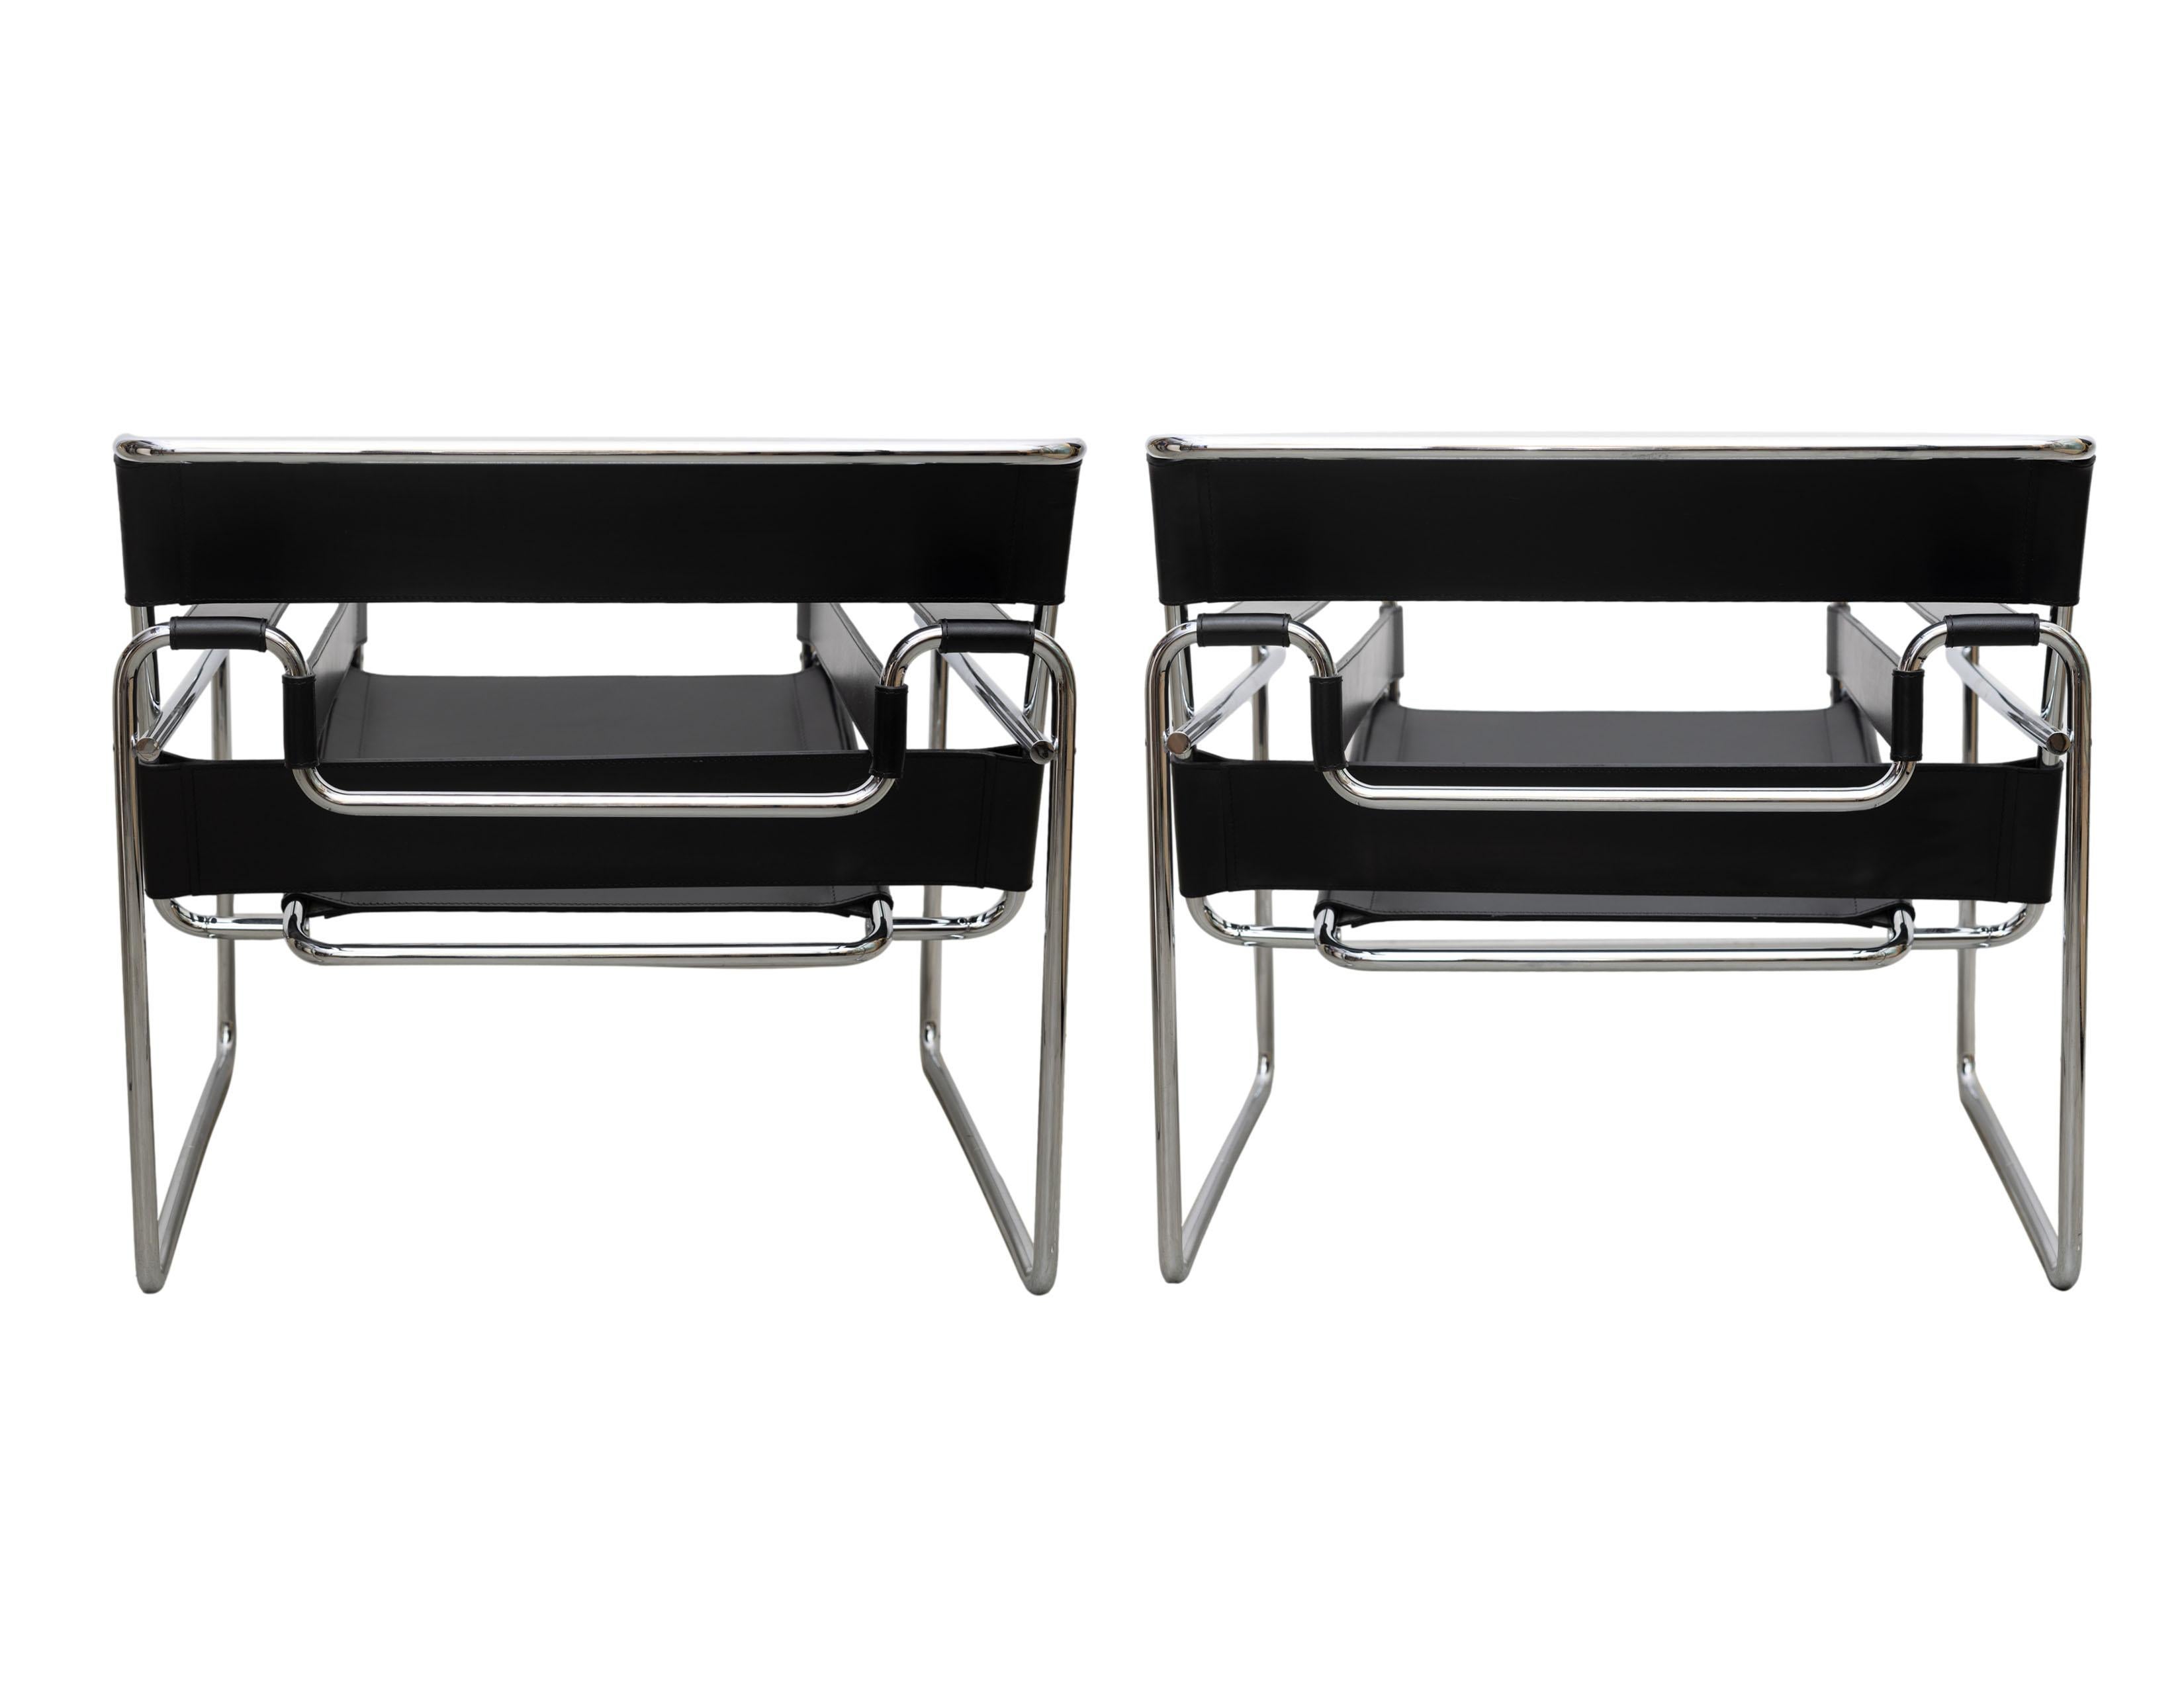 Pair of Iconic Wassily Chairs (Model B3) designed by Marcel Breuer (Hungarian-American 1902-1981).
Tubular chromed steel and black Italian leather, with 'Knoll Made in Italy' labels, and impressed cursive signature 'Marcel Breuer,' ca. 1974.